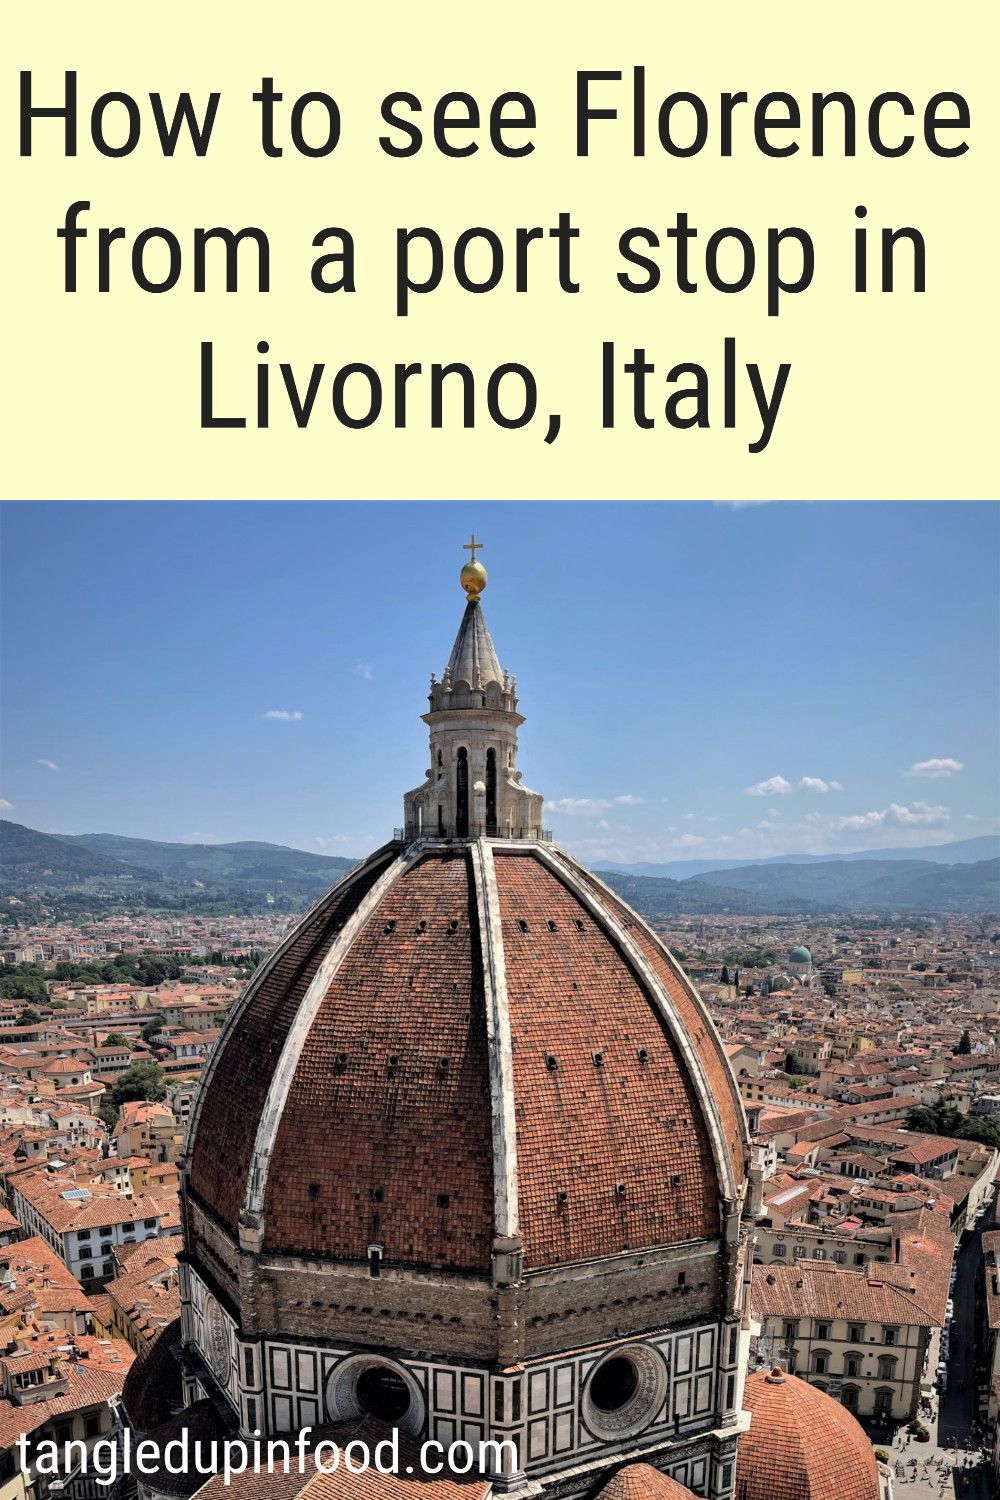 Photo of cathedral dome with text reading "How to see Florence from a port stop in Livorno, Italy"